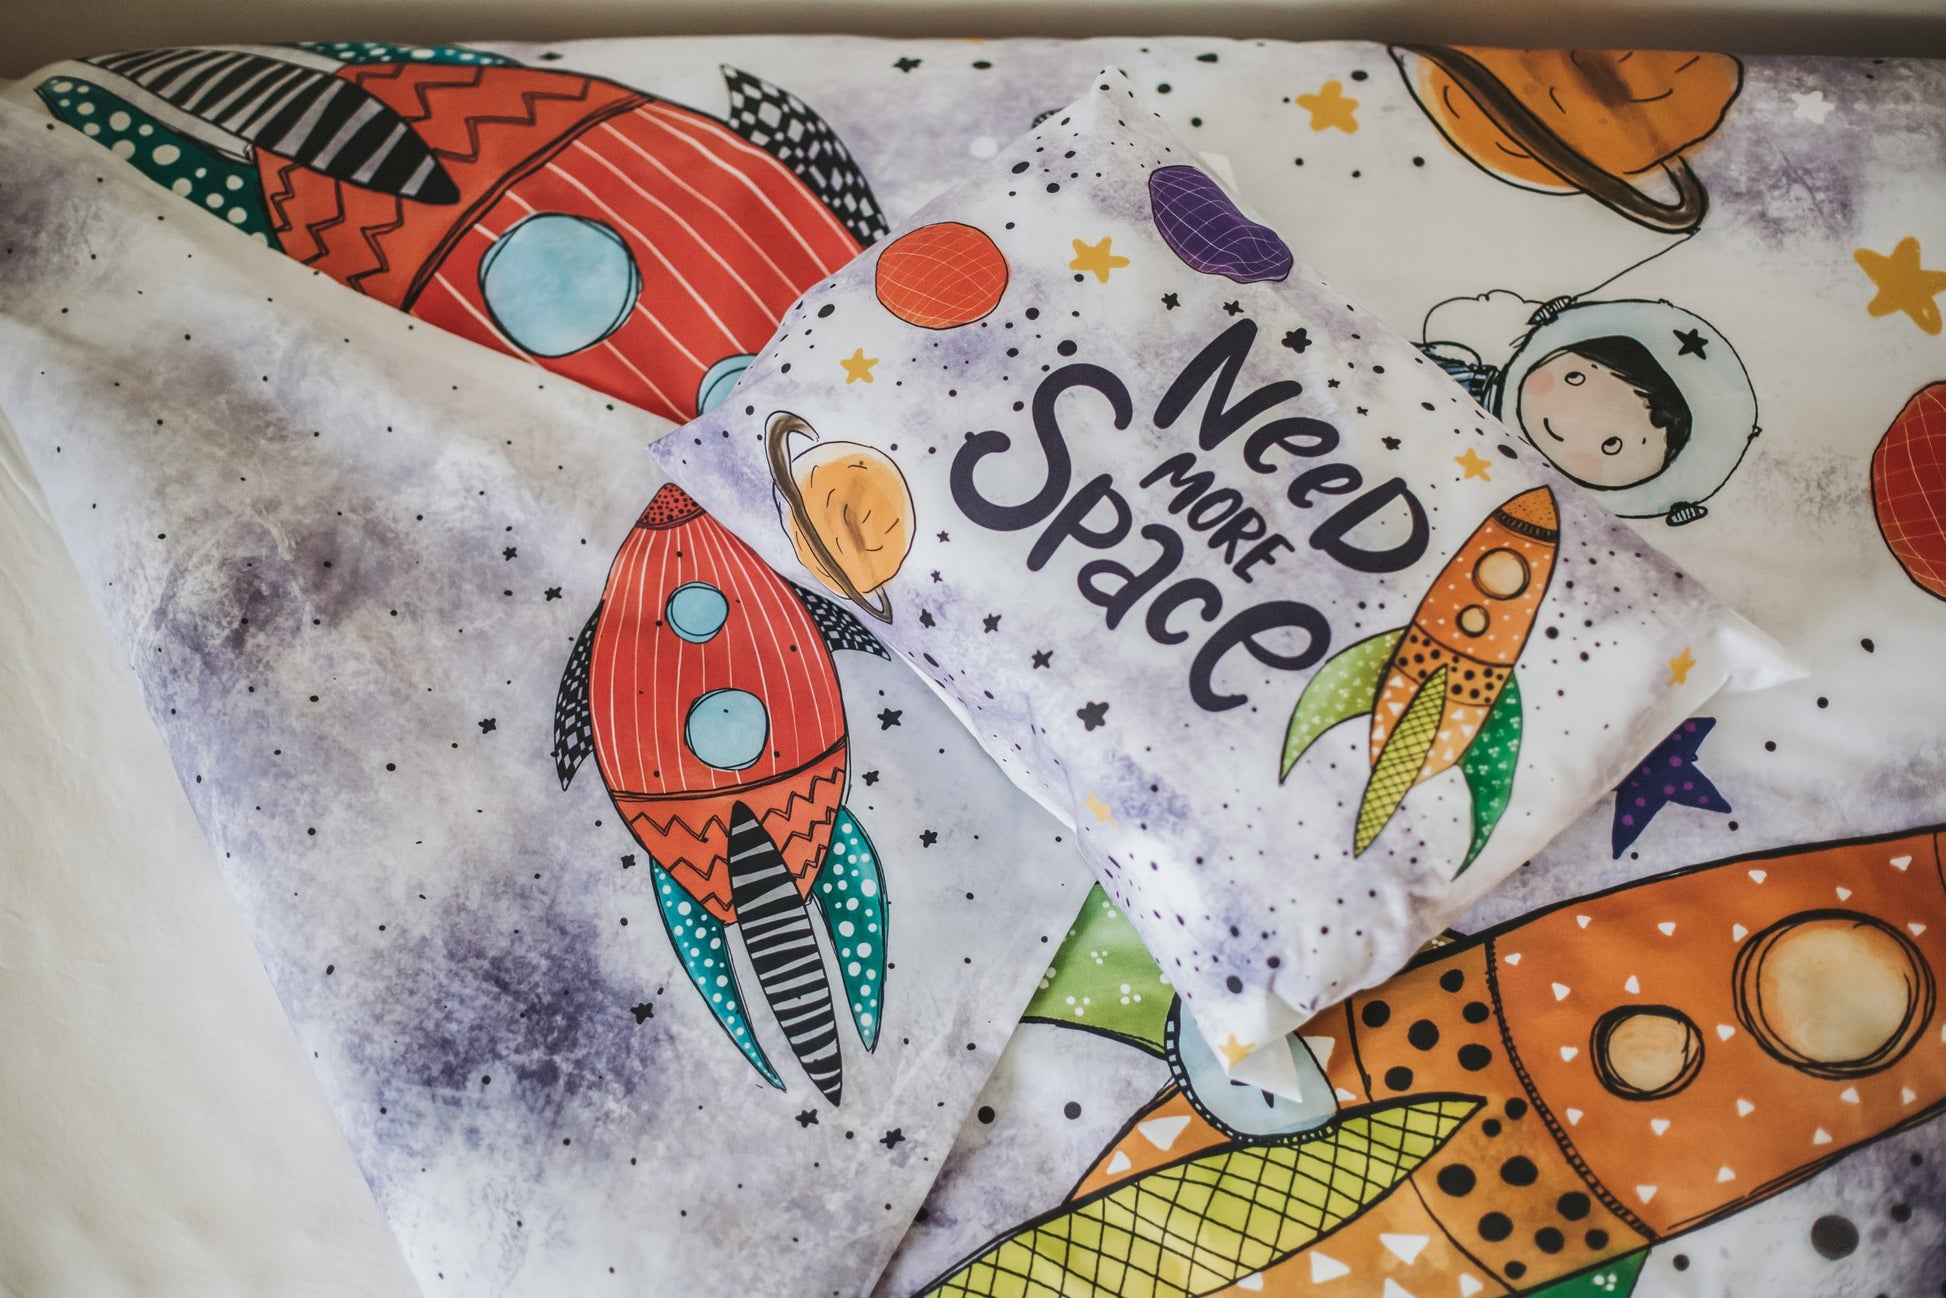 More Space Duvet Cover and Pillow Case - Blzandco